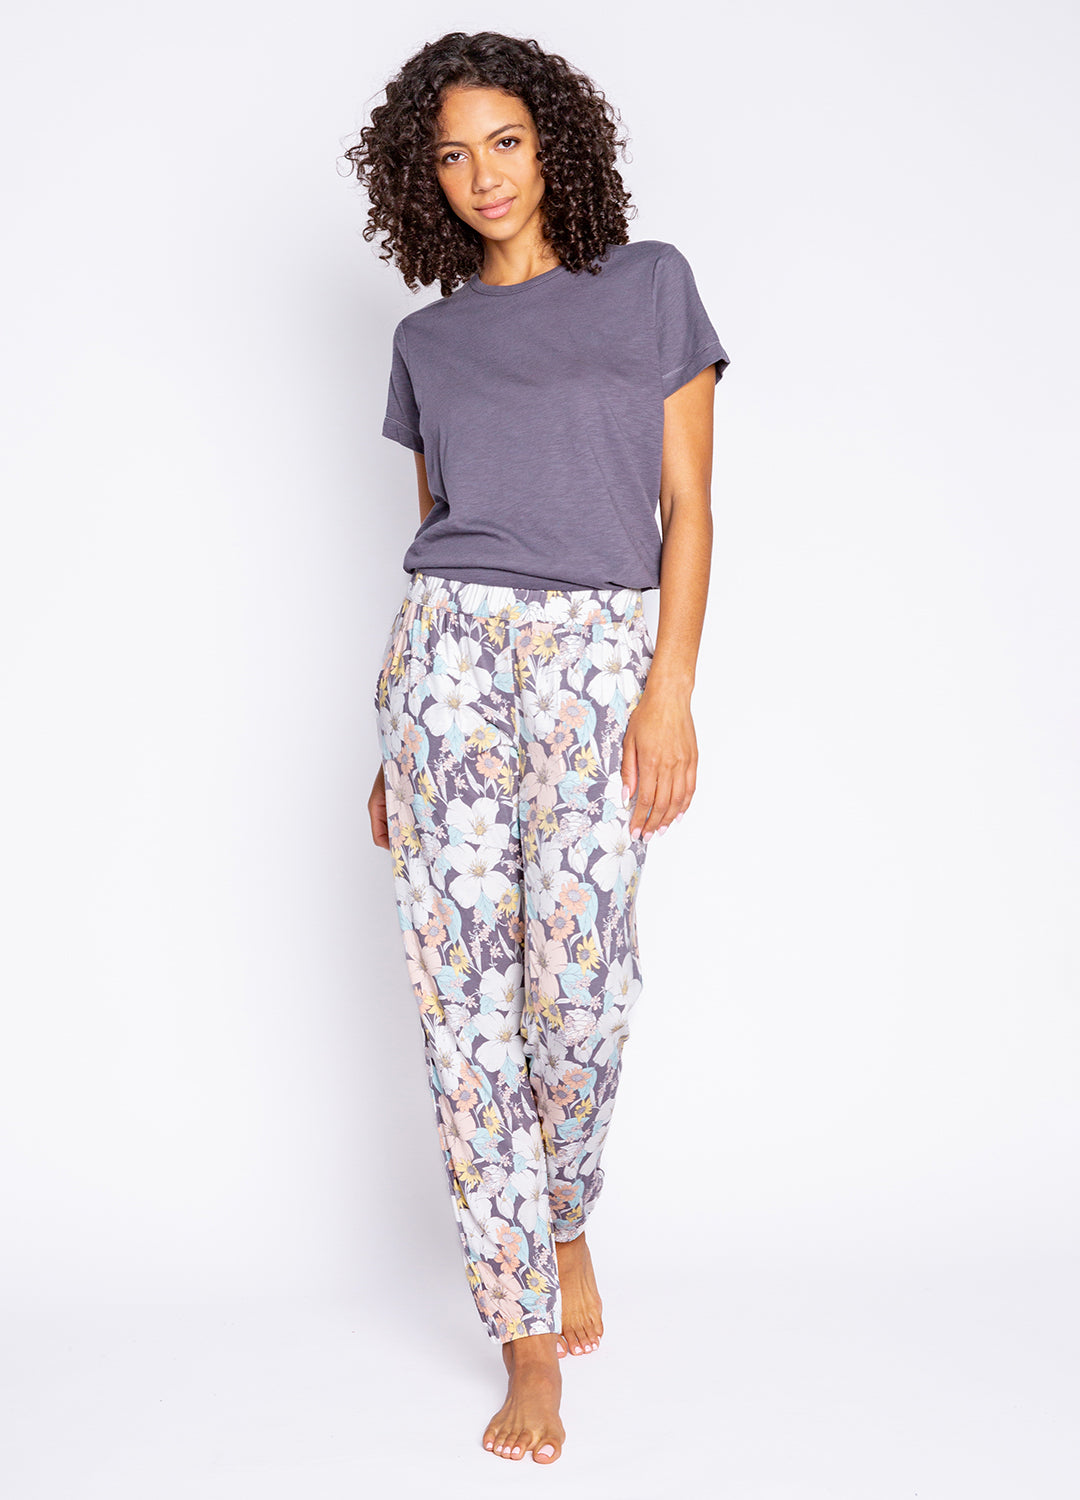 PJ Salvage Banded Lounge Jogger Pant in Pastel Dreams floral print at Inner Beach Co, Toronto, Ontario, Canada